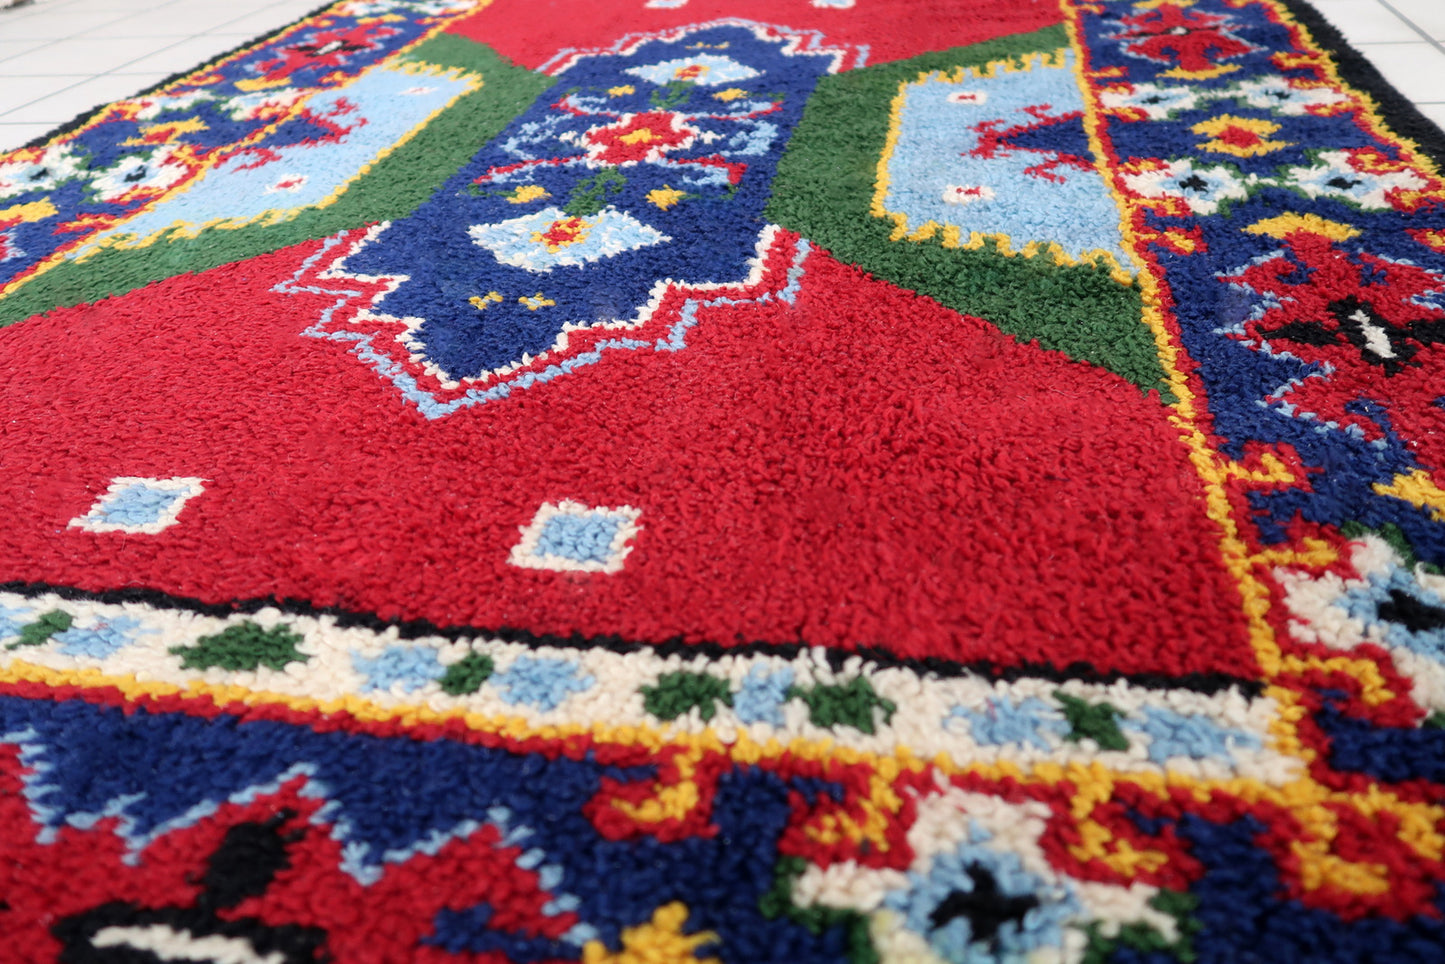 Vintage French Savonnerie rug in colorful shades. The rug has been made in wool in the middle of 20th century. It is in original good condition.